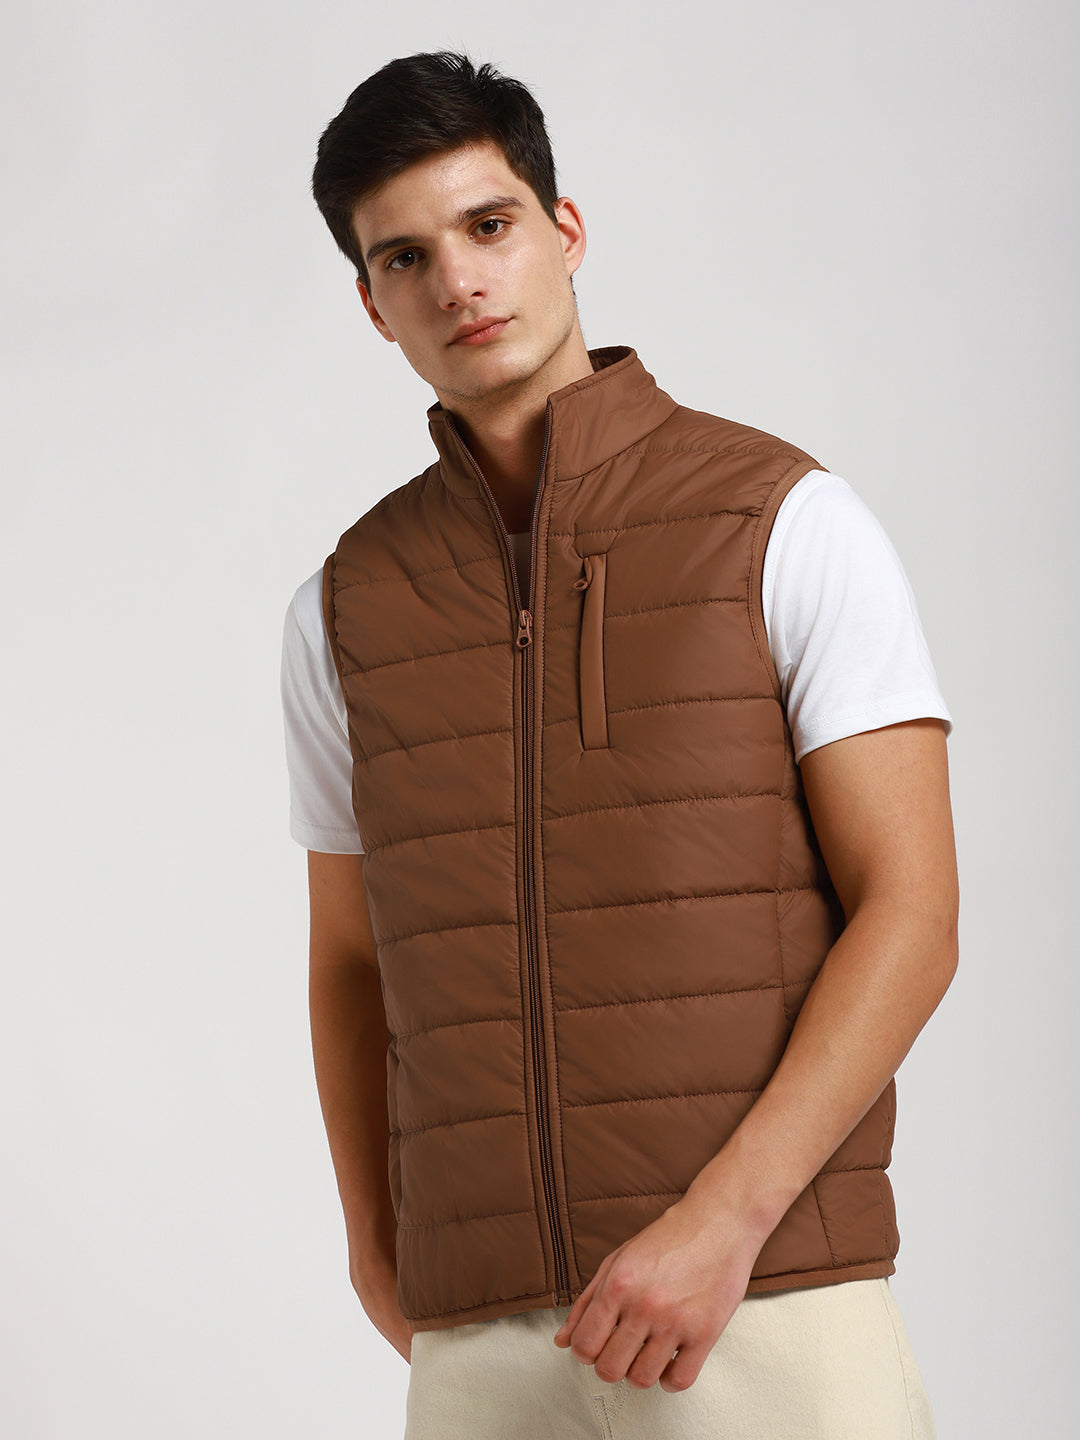 Dennis Lingo Men's Oxford Tan Solid Quilted High Neck Sleeveless Gillet Jackets